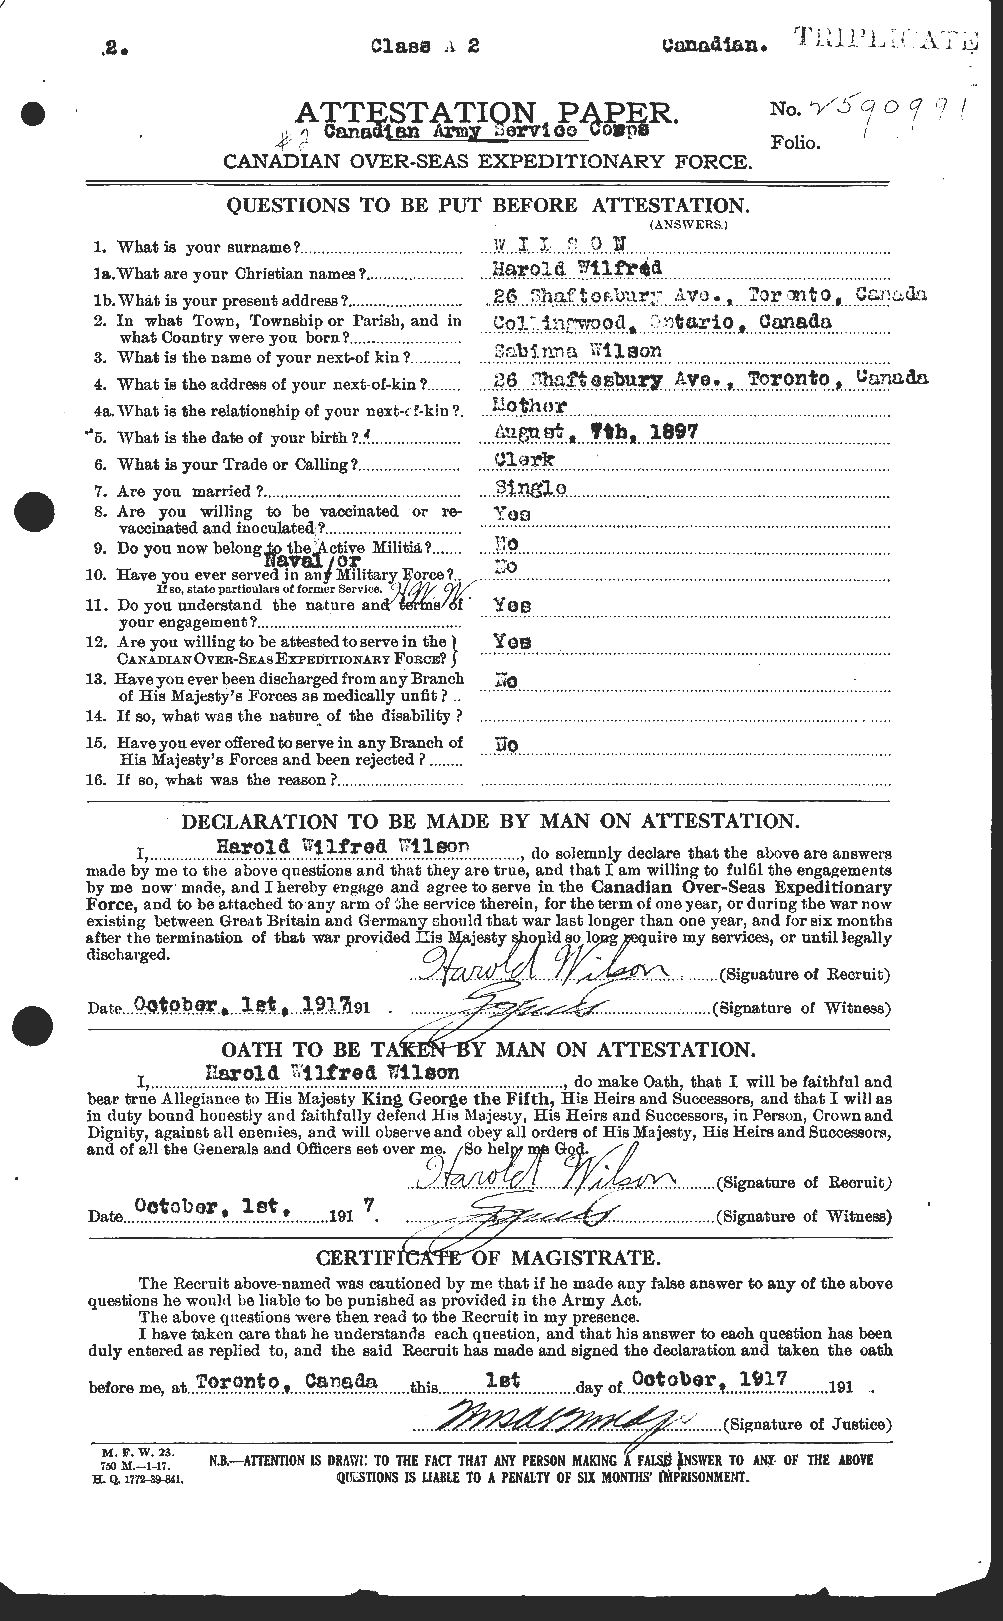 Personnel Records of the First World War - CEF 679418a